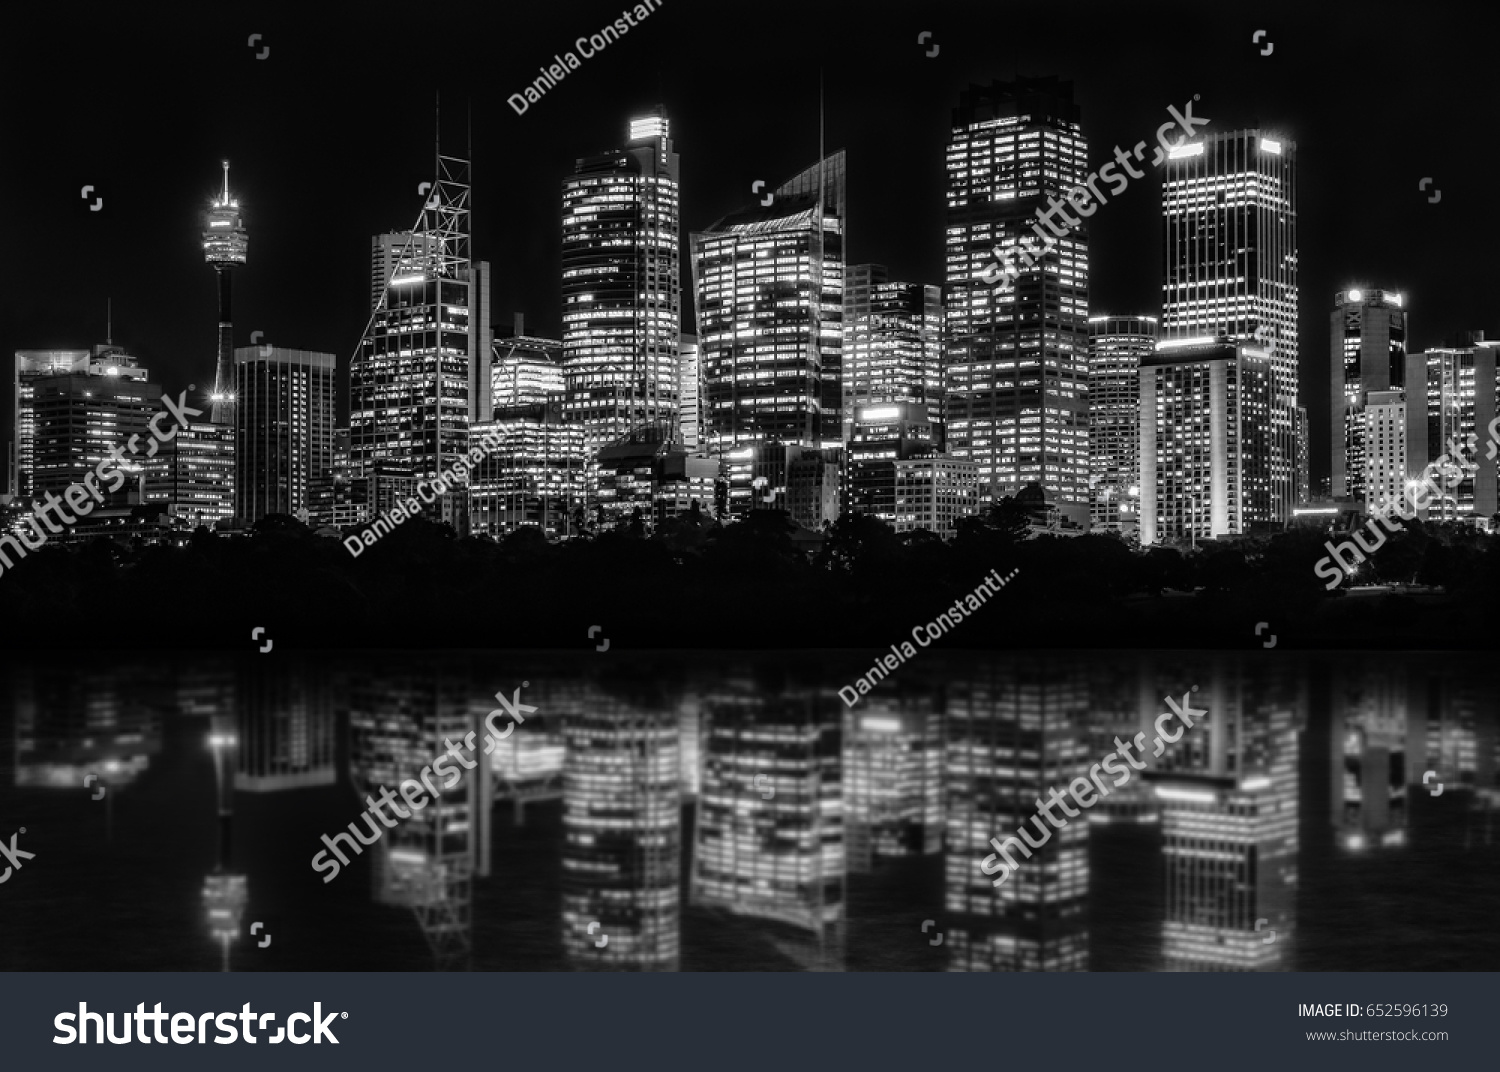 Beautiful Sydney Skyline at night in black and white of Central Business District seen from Farm Cove, with reflections in bay's water. #652596139